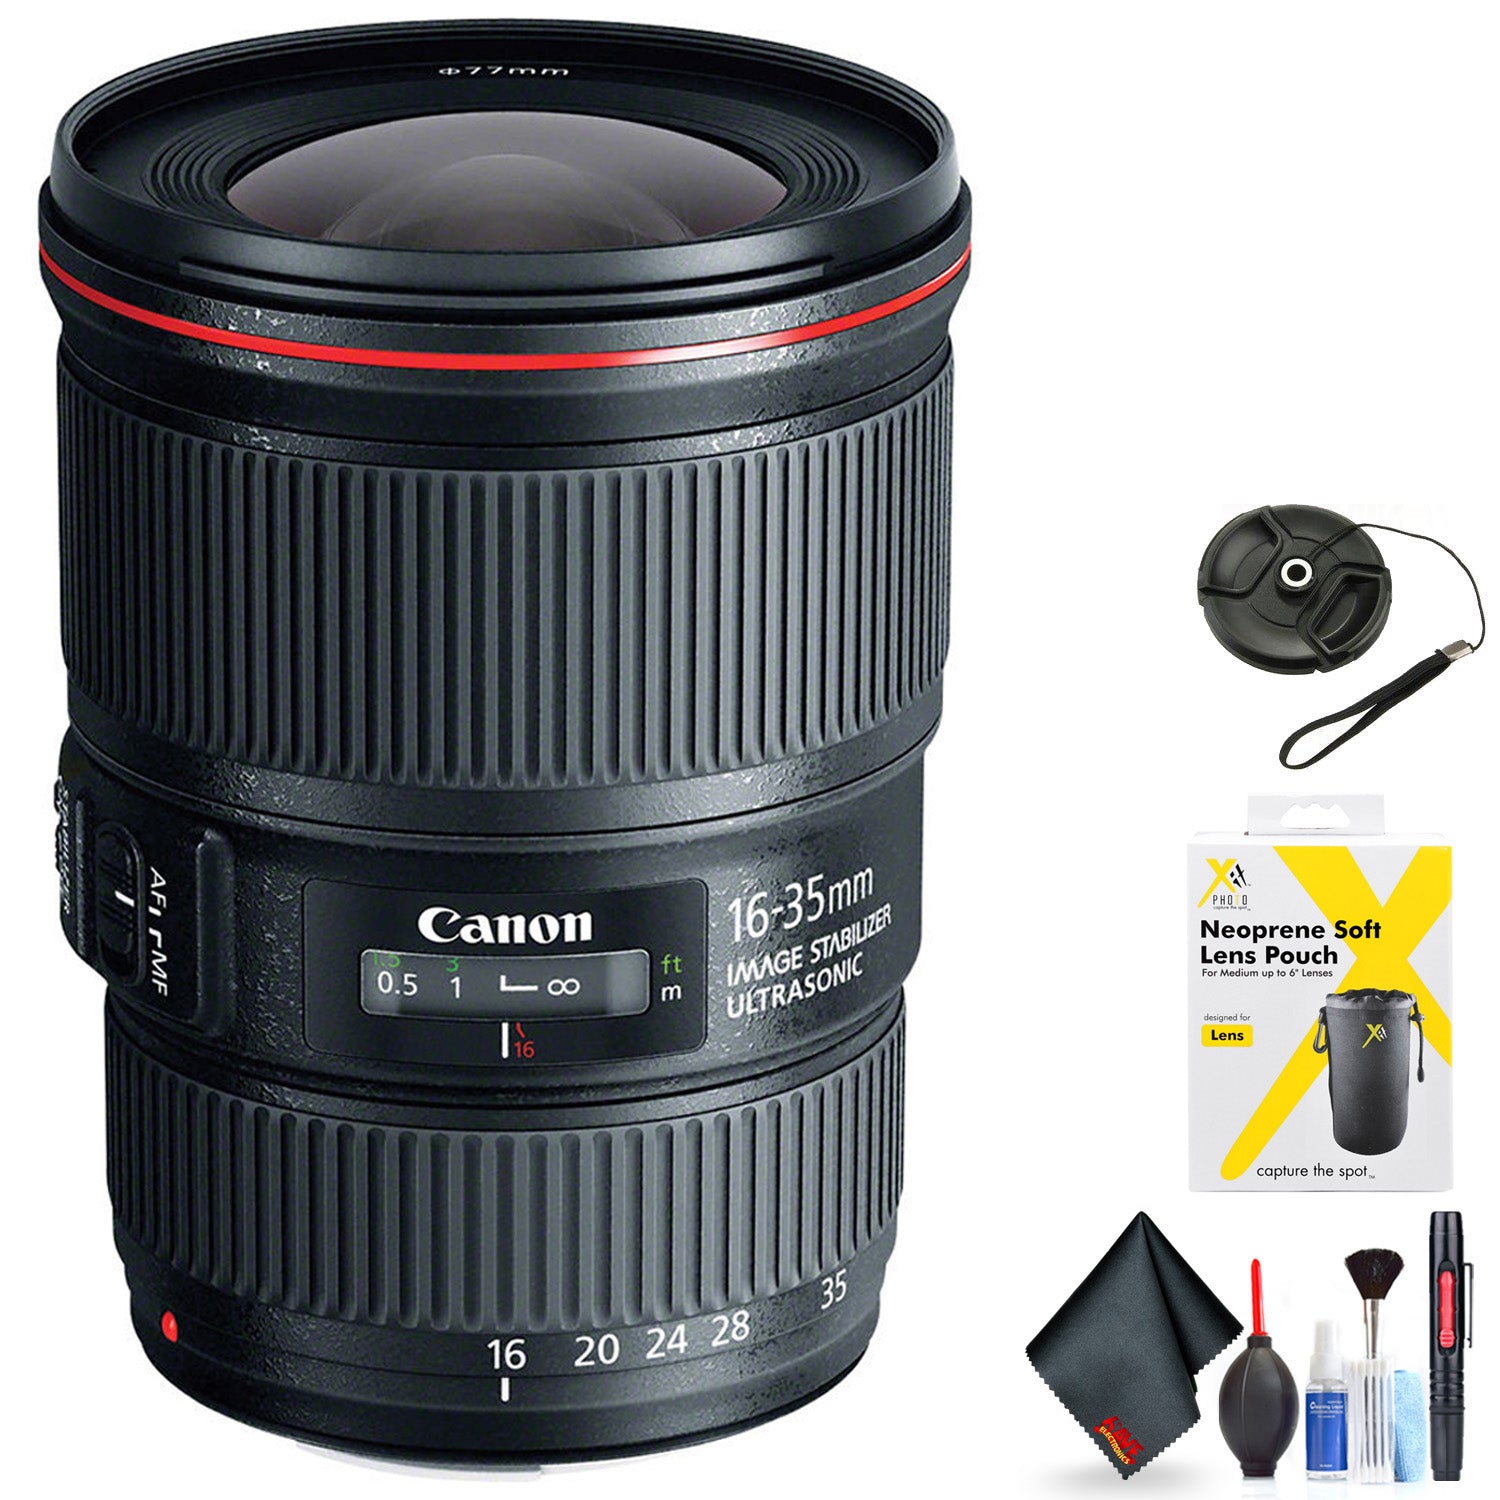 Canon EF 16-35mm f/4L is USM Lens for Canon EF Mount + Accessories (International Model with 2 Year Warranty)